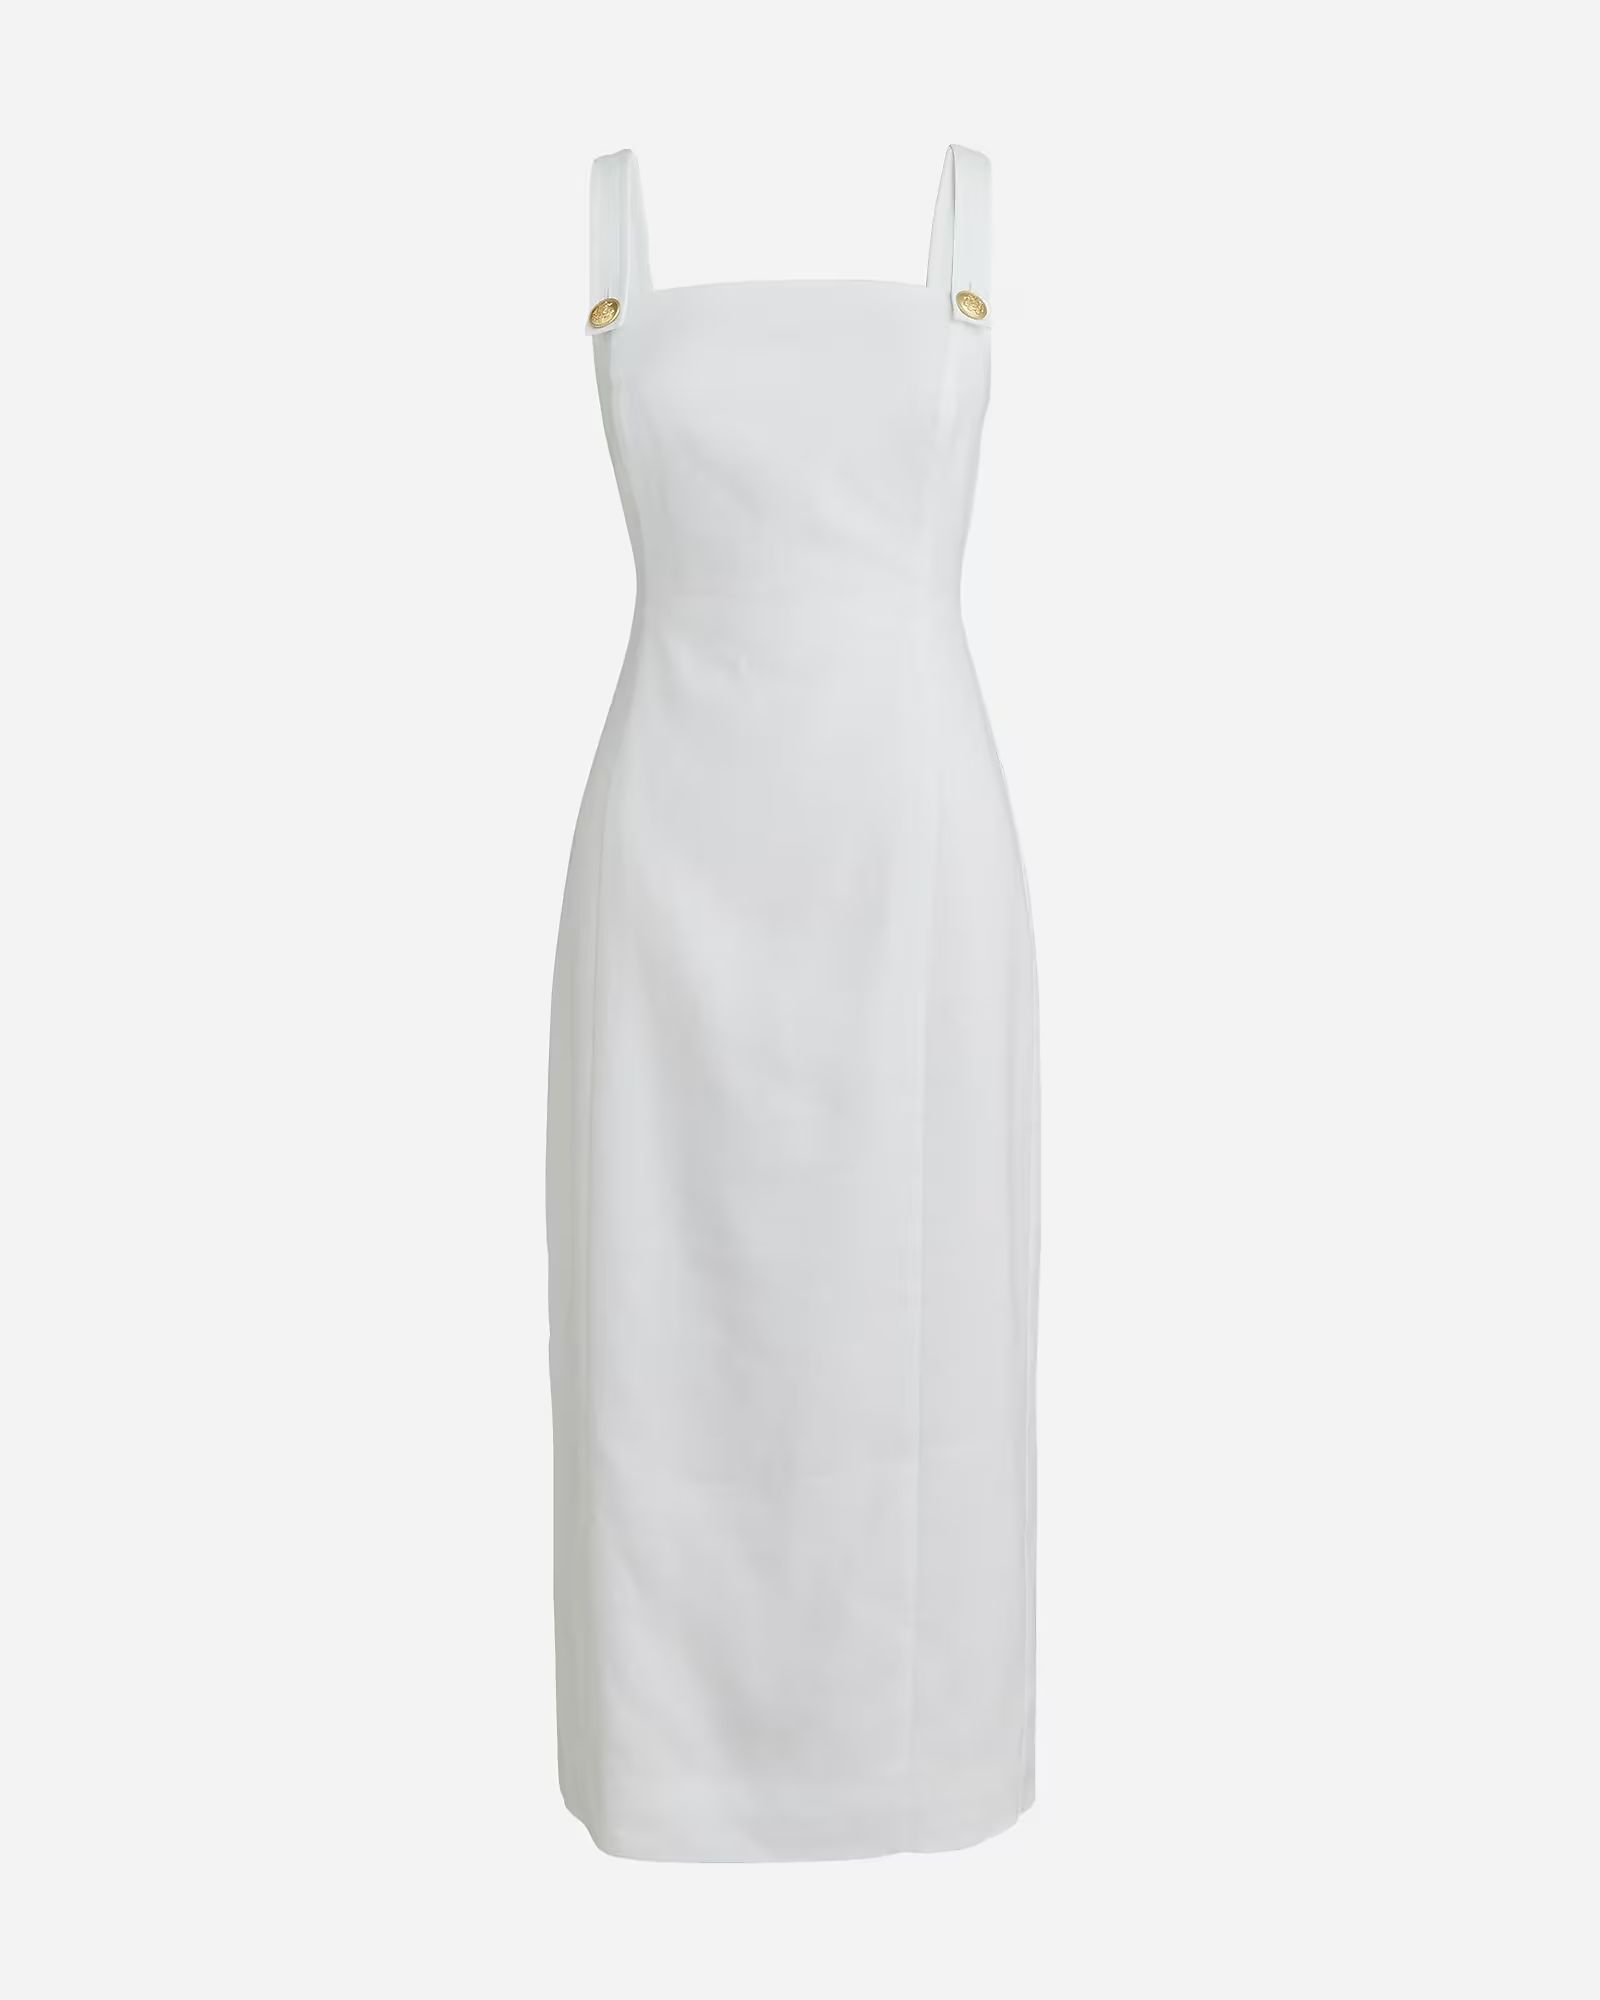 newStretch linen-blend sheath dress$134.50$228.00 (41% Off)30% off full price with code SHOP30Whi... | J.Crew US